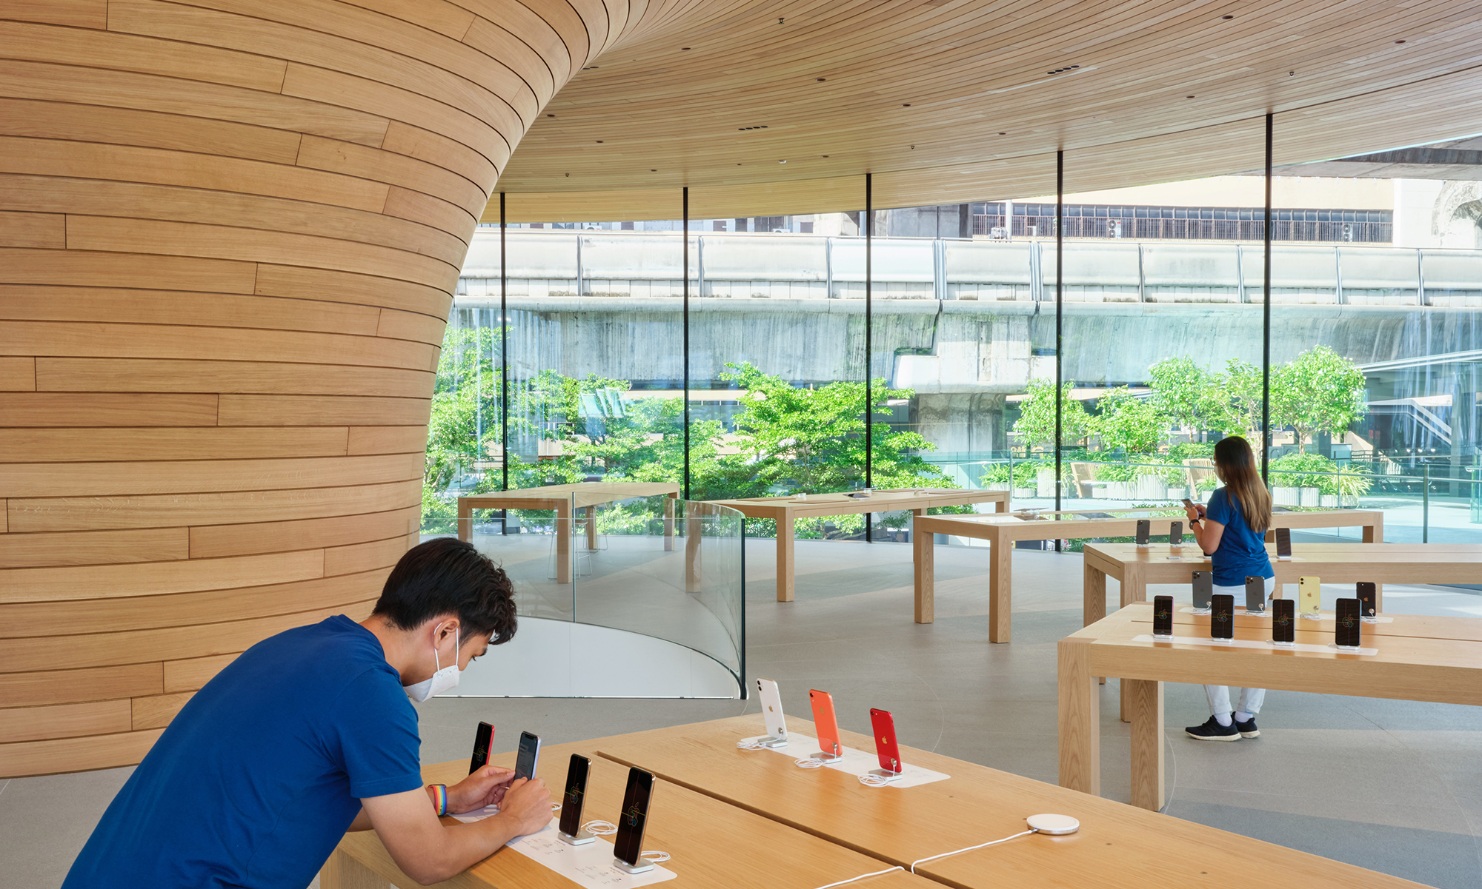 Product presentation in the Apple Store Bangkok under tree canopy